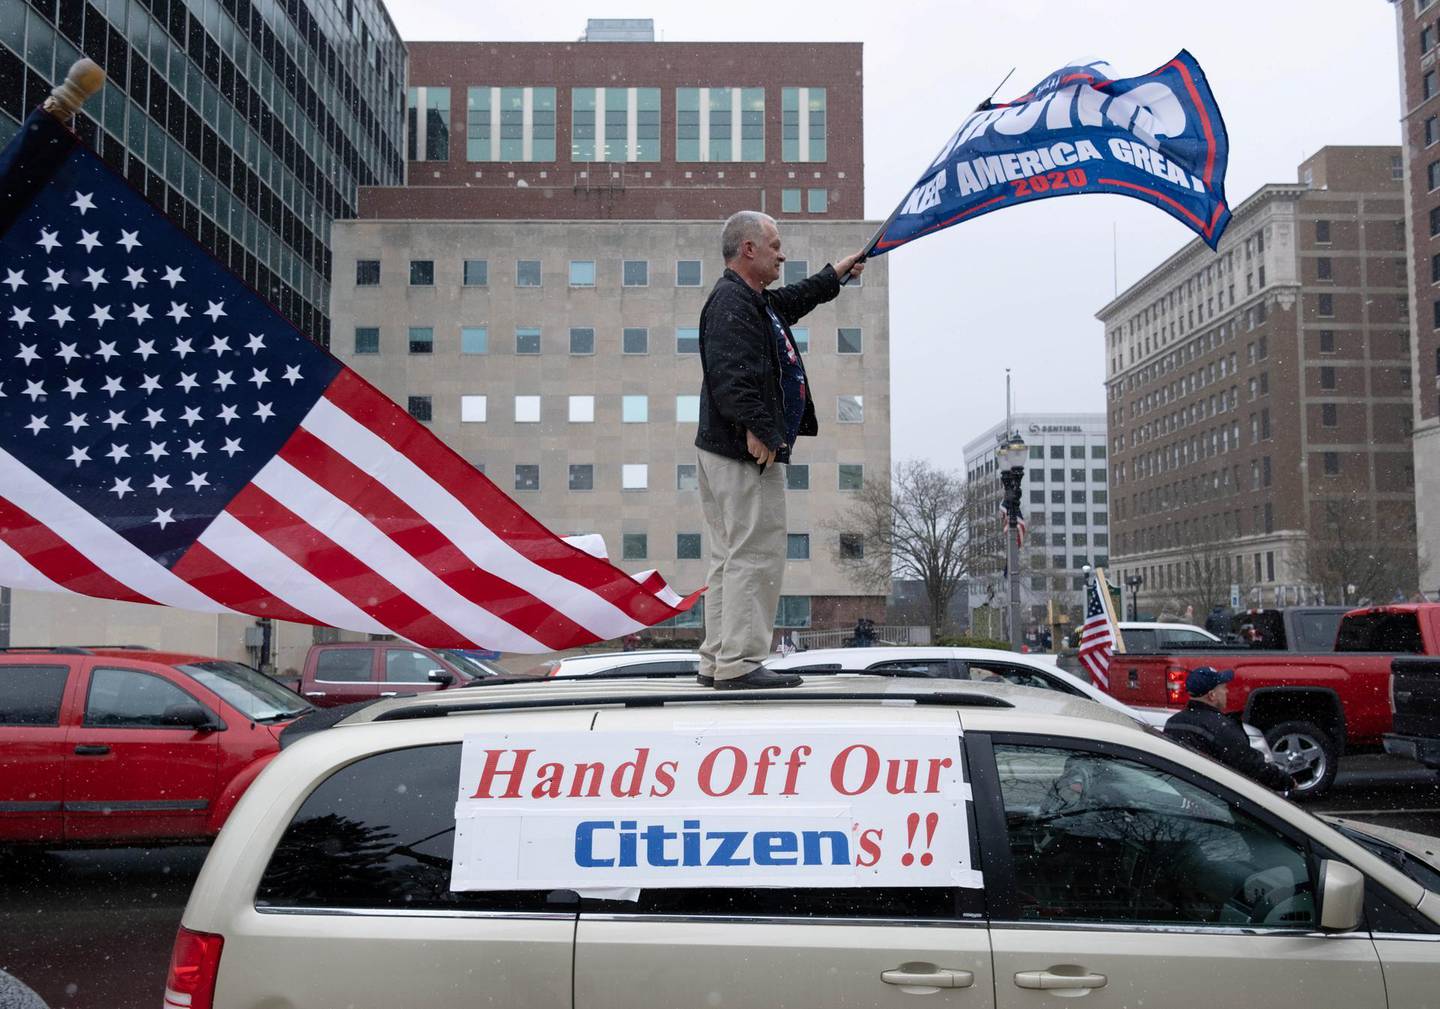 Supporters of the Michigan Conservative Coalition protest against the state's extended stay-at-home order, amid the spread of the coronavirus disease (COVID-19), at the Capitol building in Lansing, Michigan, U.S. April 15, 2020. REUTERS/Seth Herald     TPX IMAGES OF THE DAY